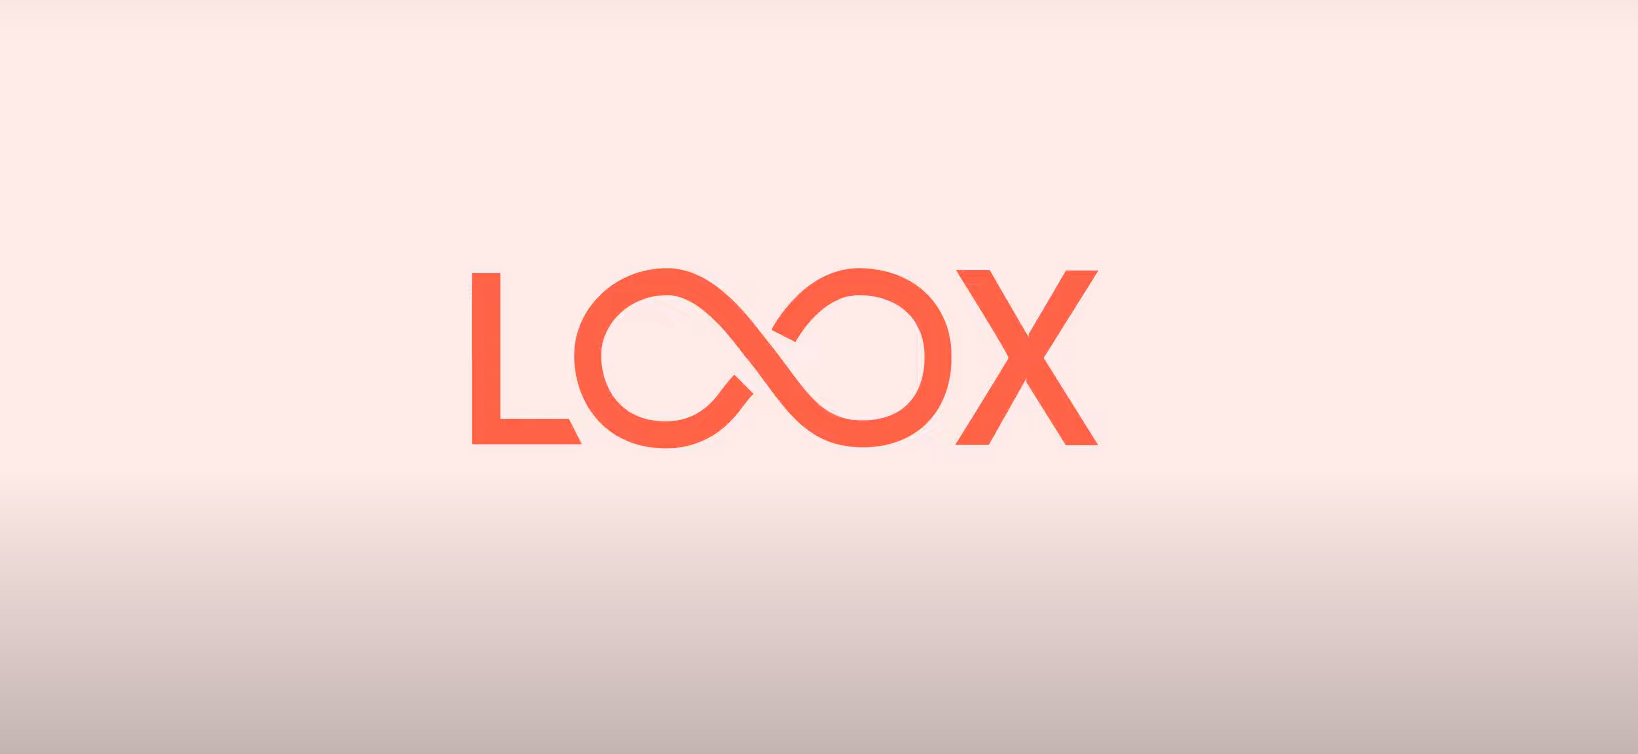 7 Key Features of Loox